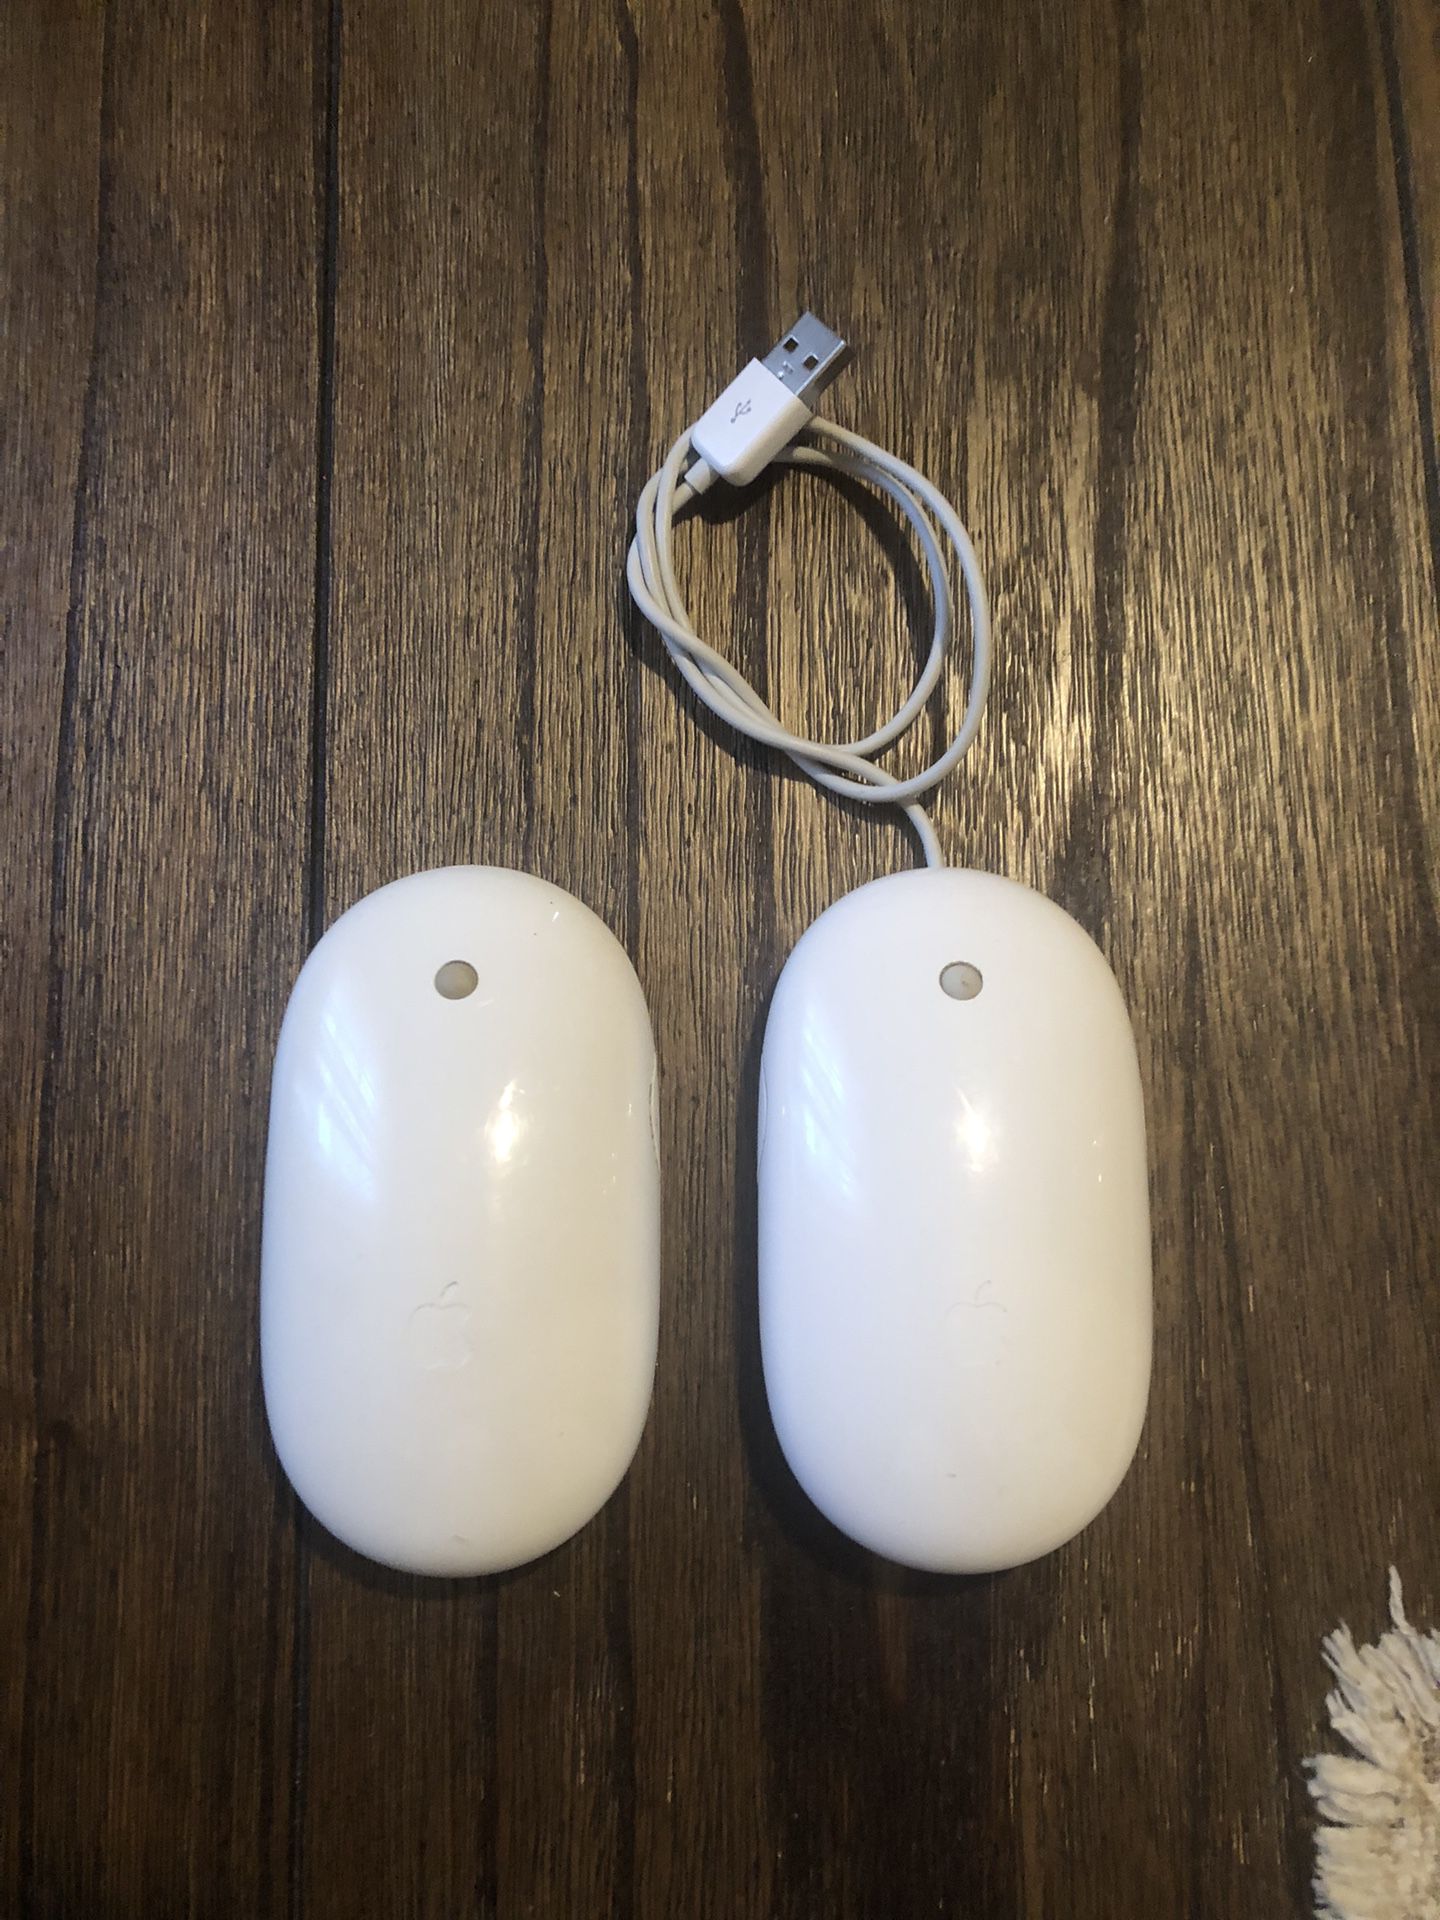 Apple Mouse Wireless & Wire 